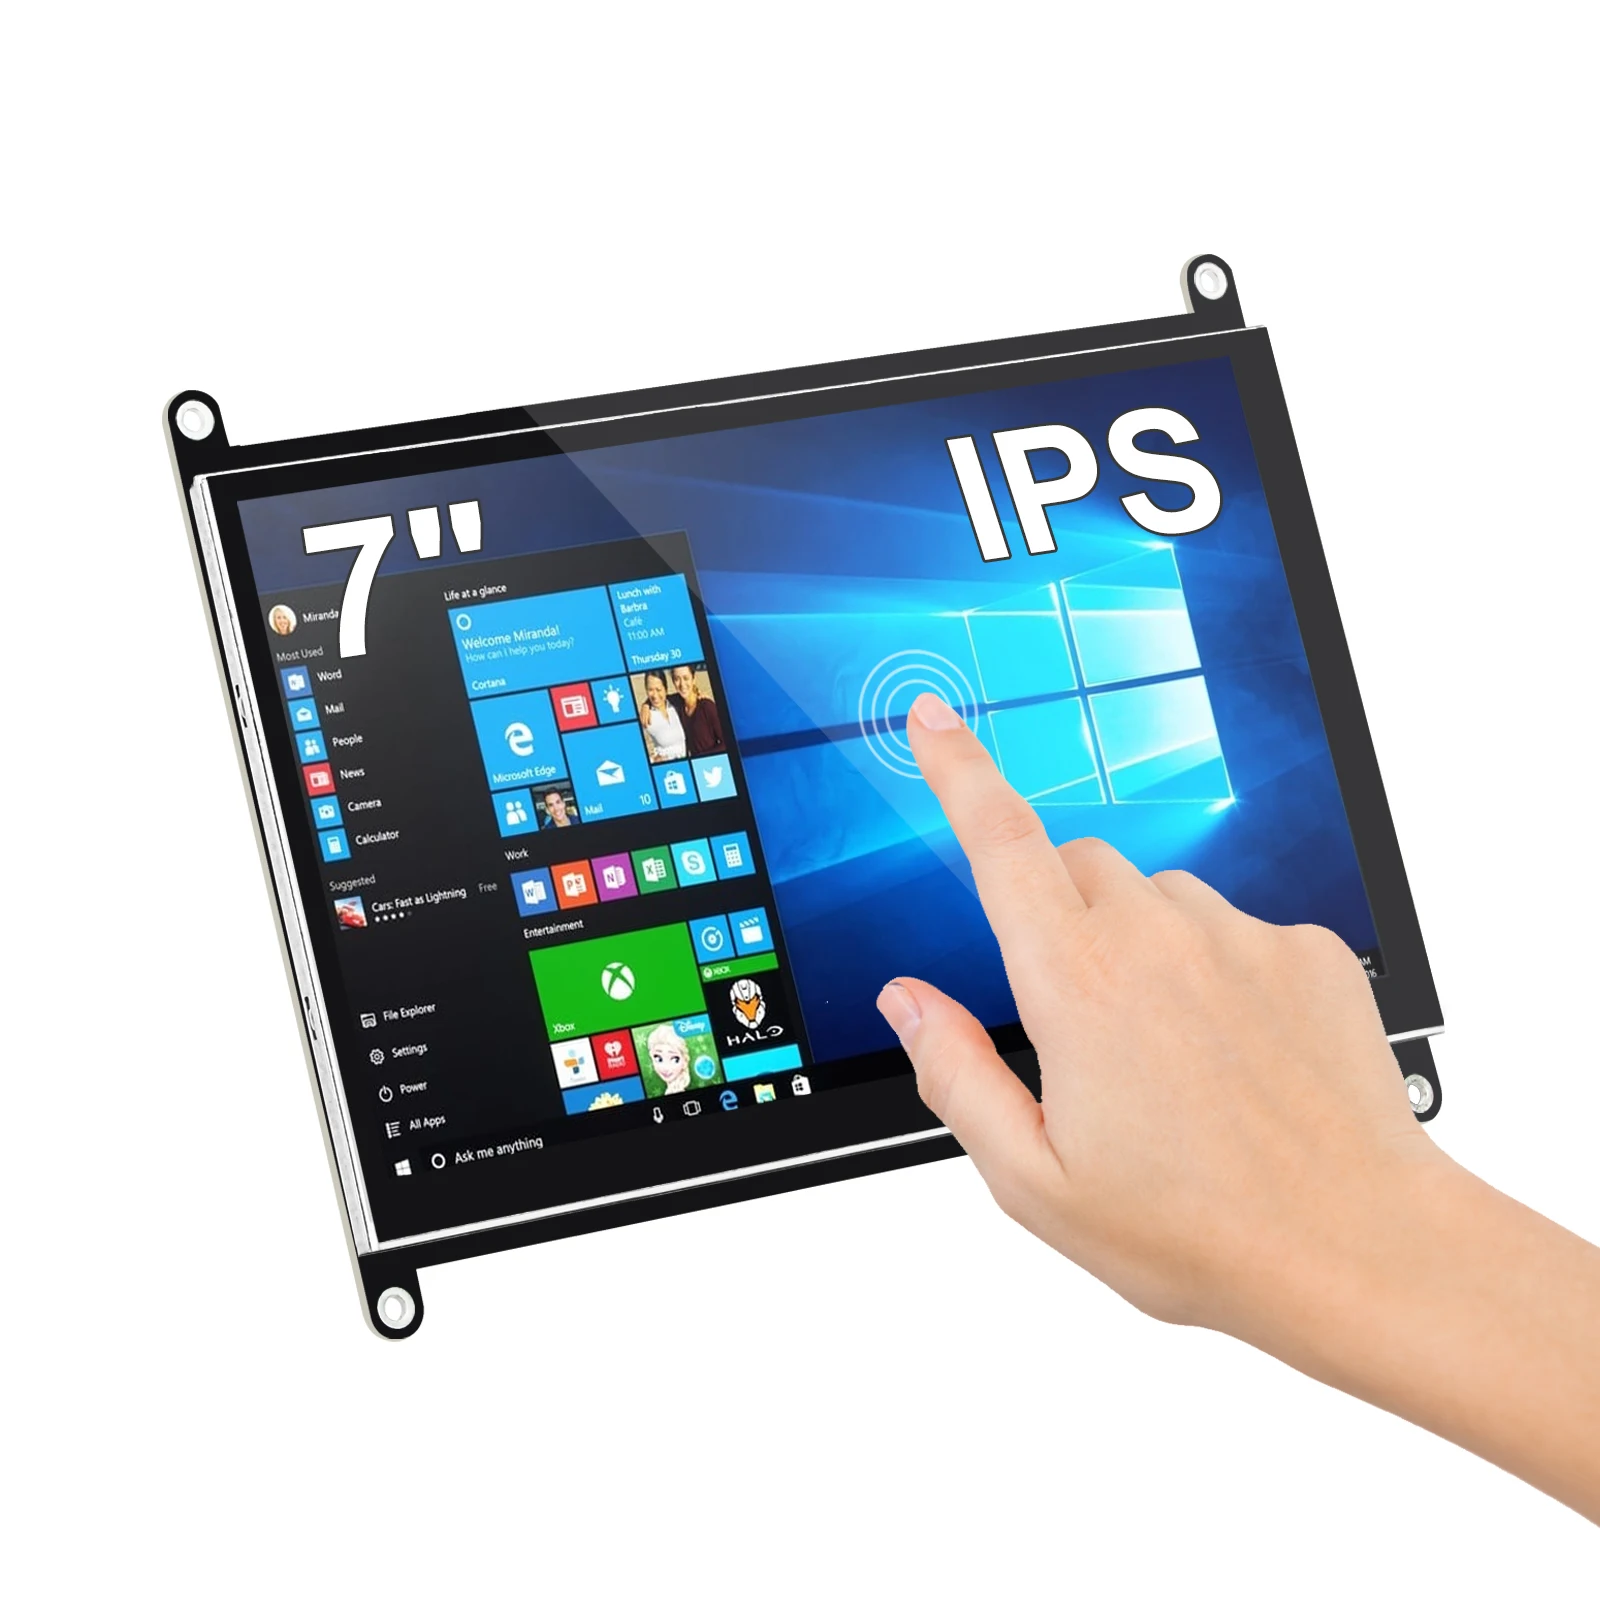 

7inch HDMI 1024*600 IPS Capacitive Touch Screen for Raspberry Pi 4,HDMI/VGA Display Interface Support Raspberry Pi 2 3